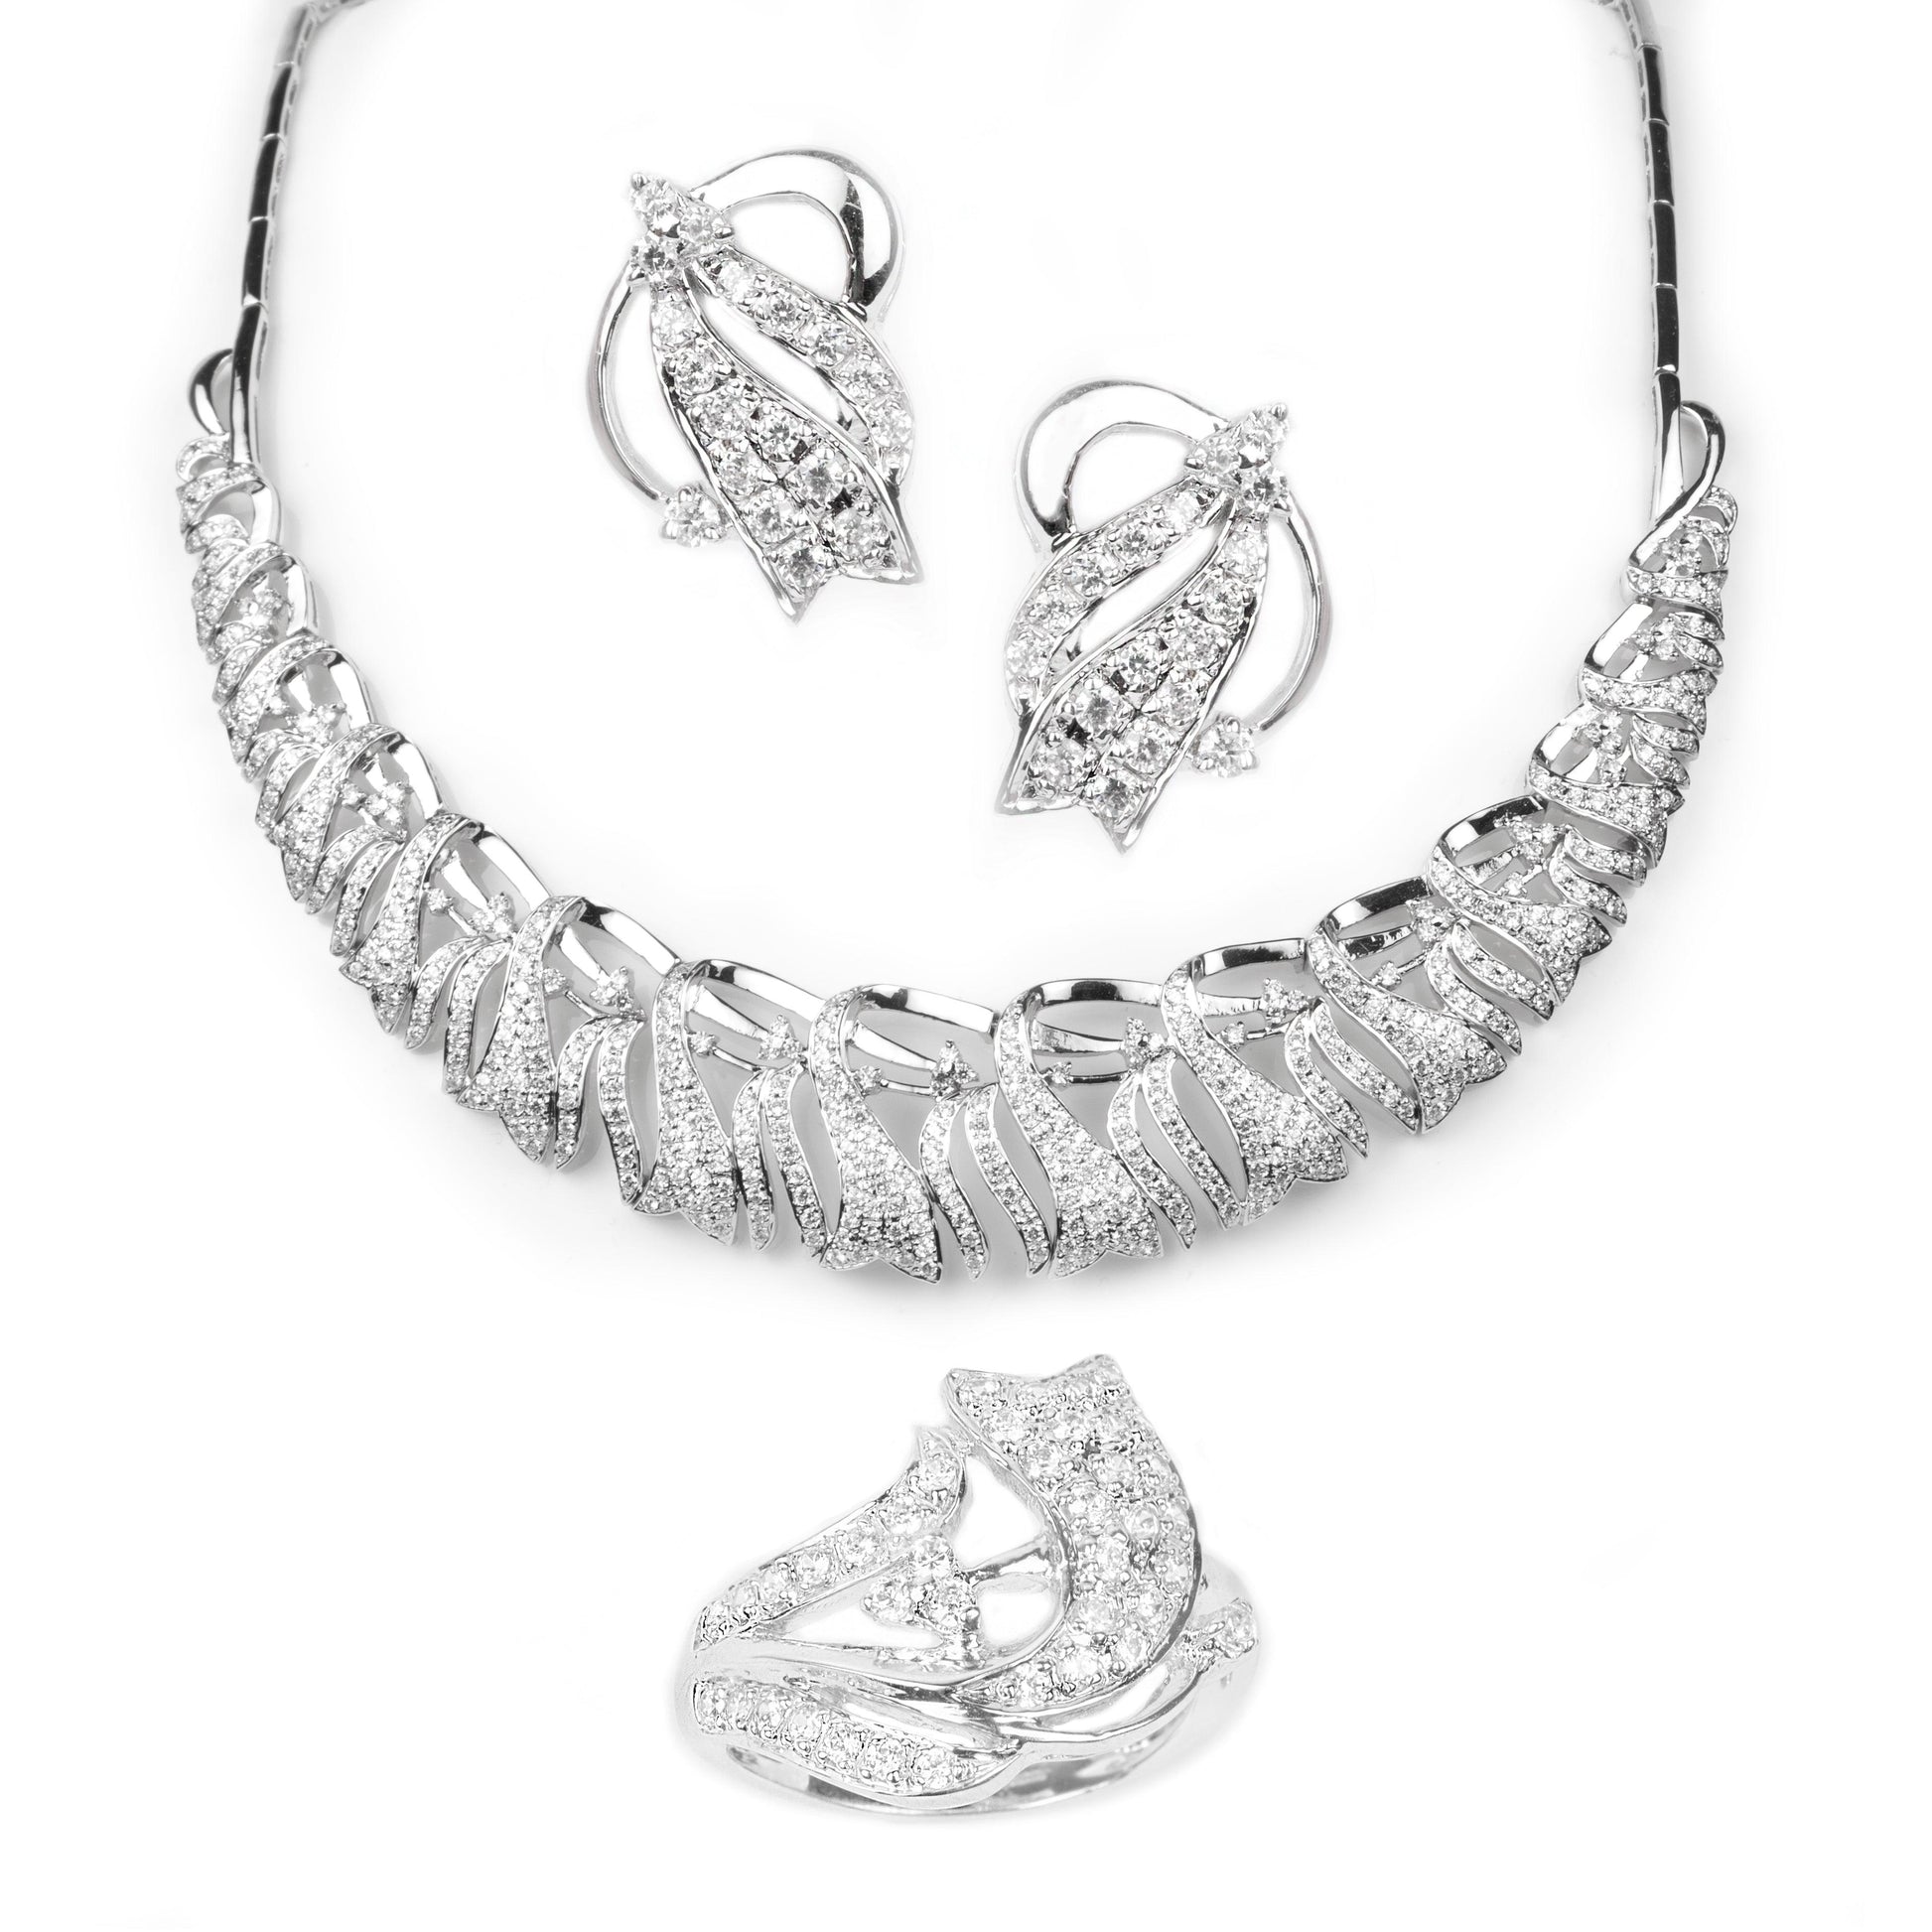 18ct White Gold Necklace, Earrings & Ring set with Cubic Zirconia stones (59.1g) N&E&LR-5231 - Minar Jewellers